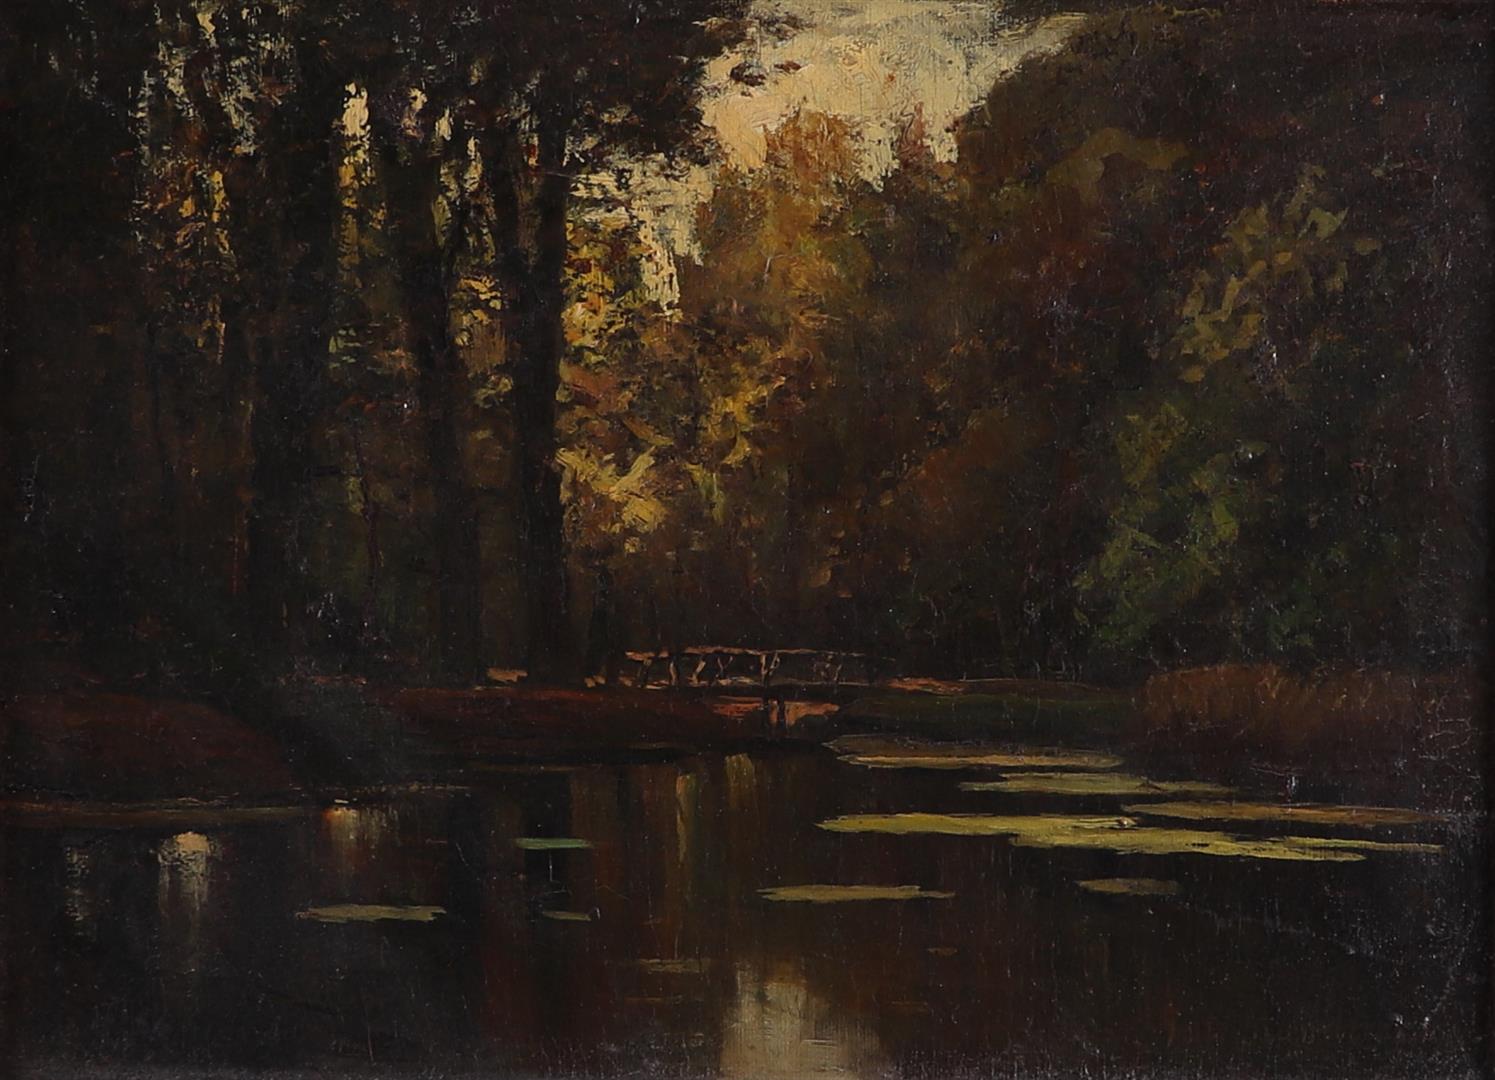 Frits Mondrian (The Hague 1853 - 1932), A pond with a bridge in the Haagse Bos, 